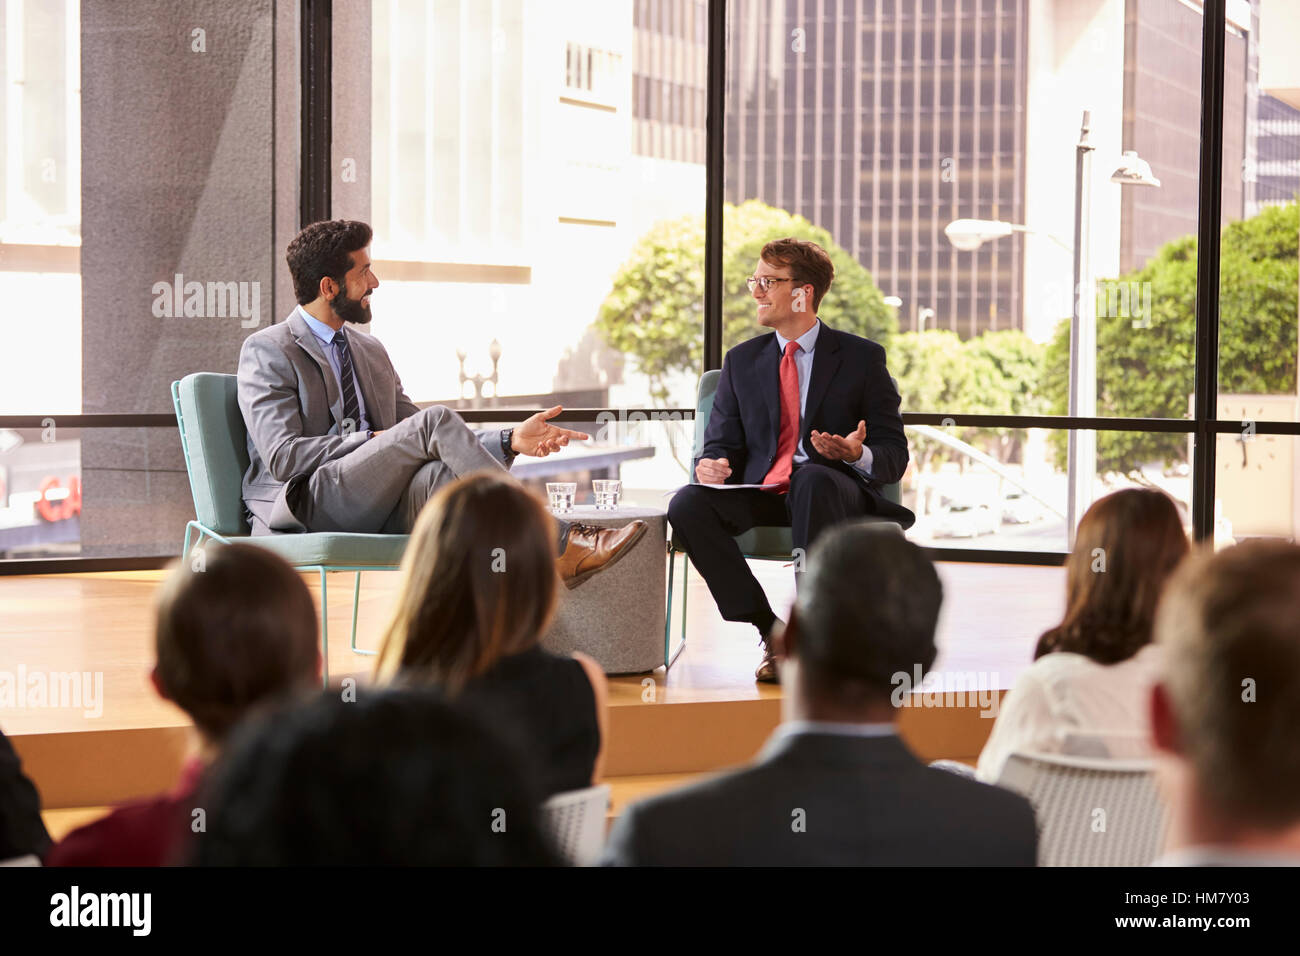 Speaker and interviewer talk in front of audience at seminar Stock Photo